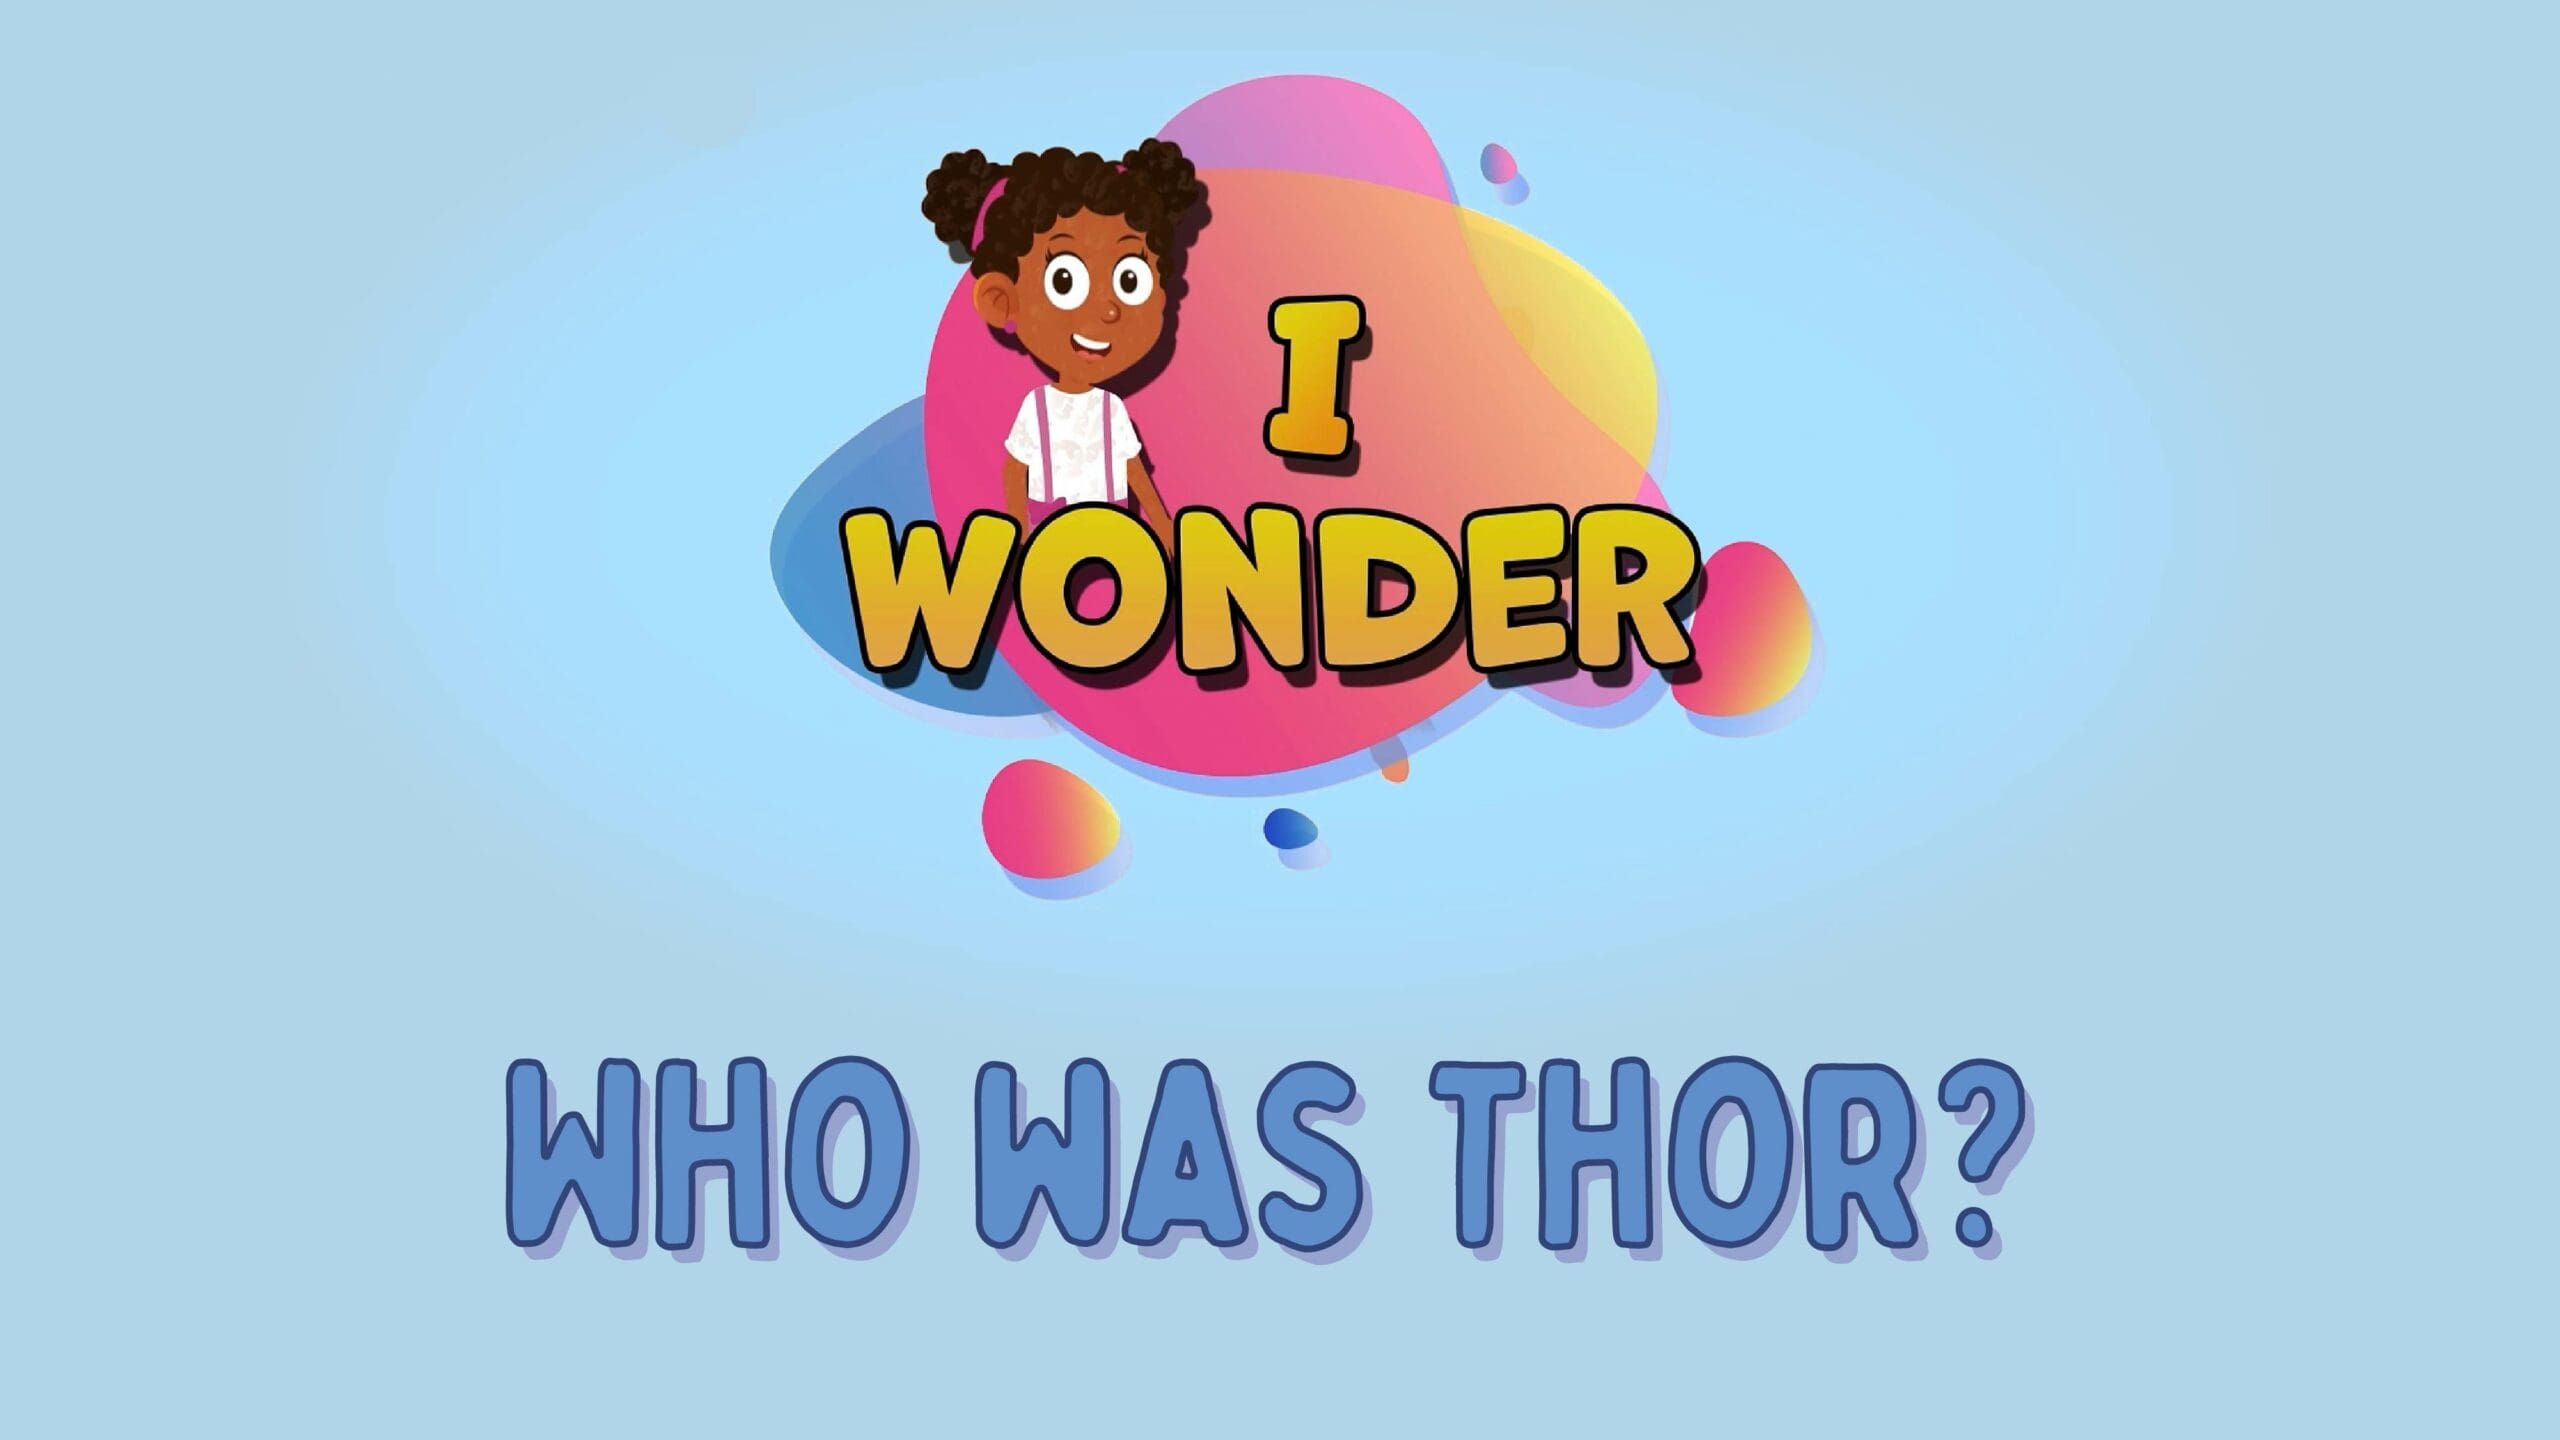 Who was Thor